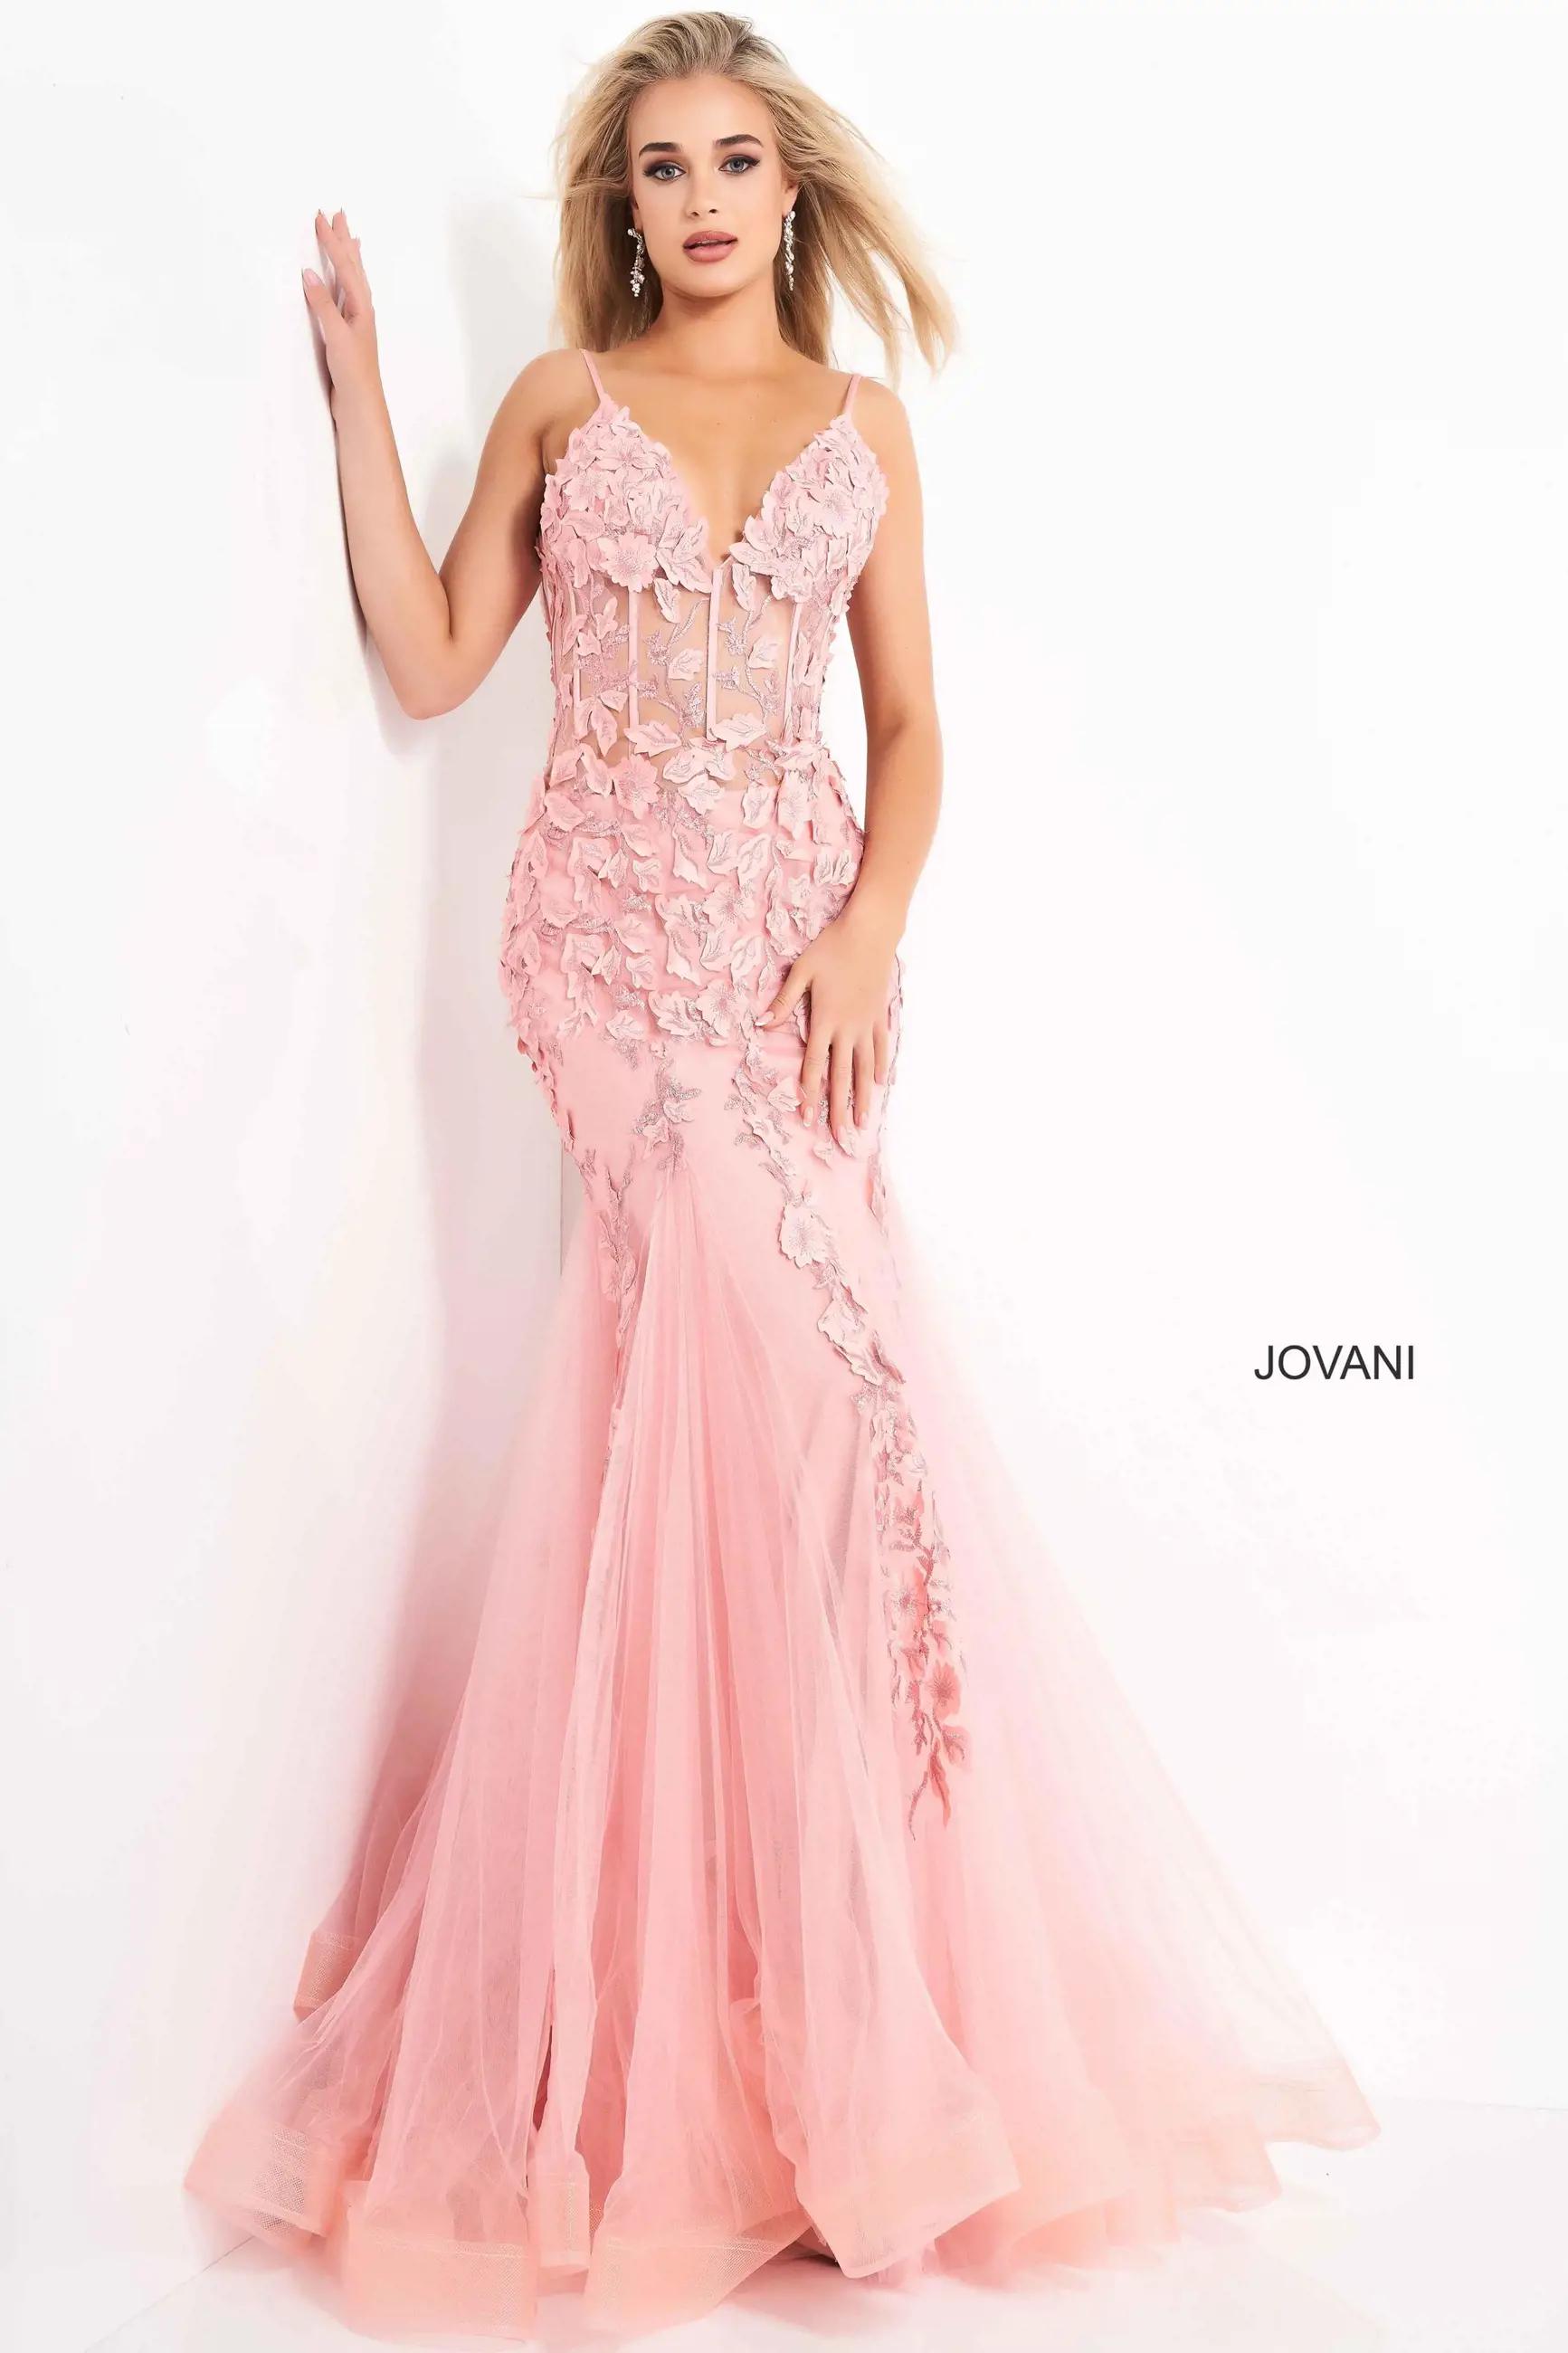 How to Find the Perfect Prom Dress Image